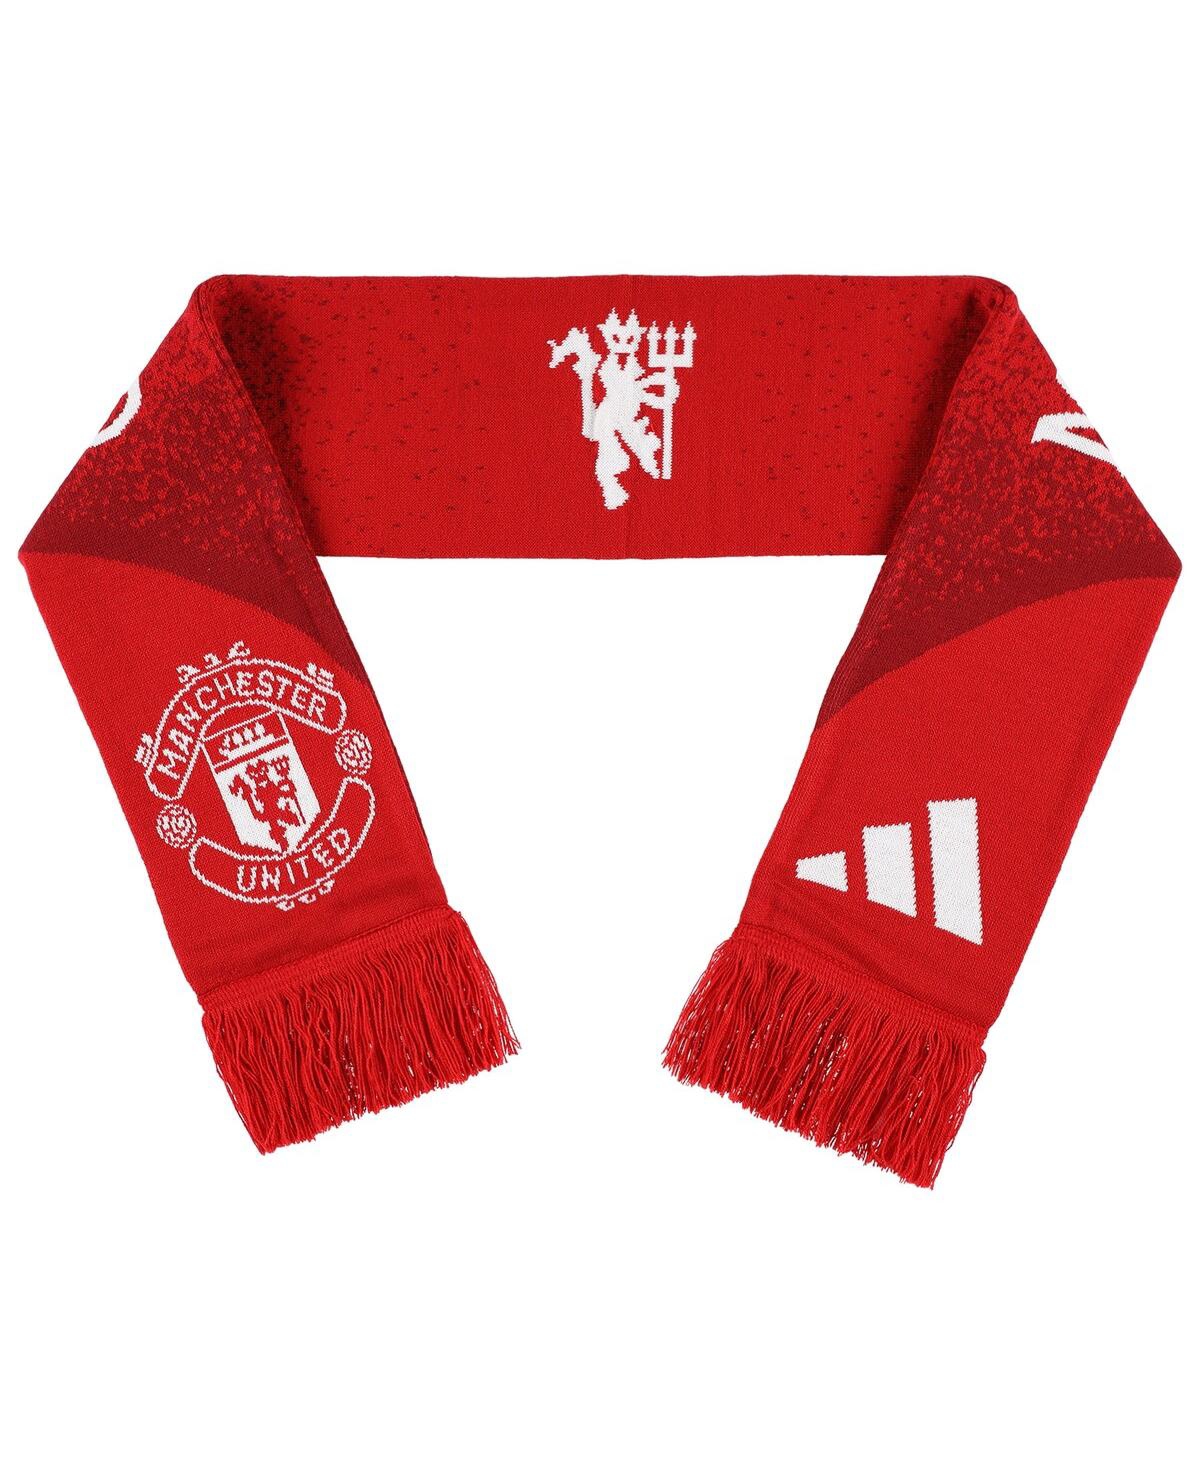 Adidas Originals Men's And Women's Manchester United Team Scarf In Gold